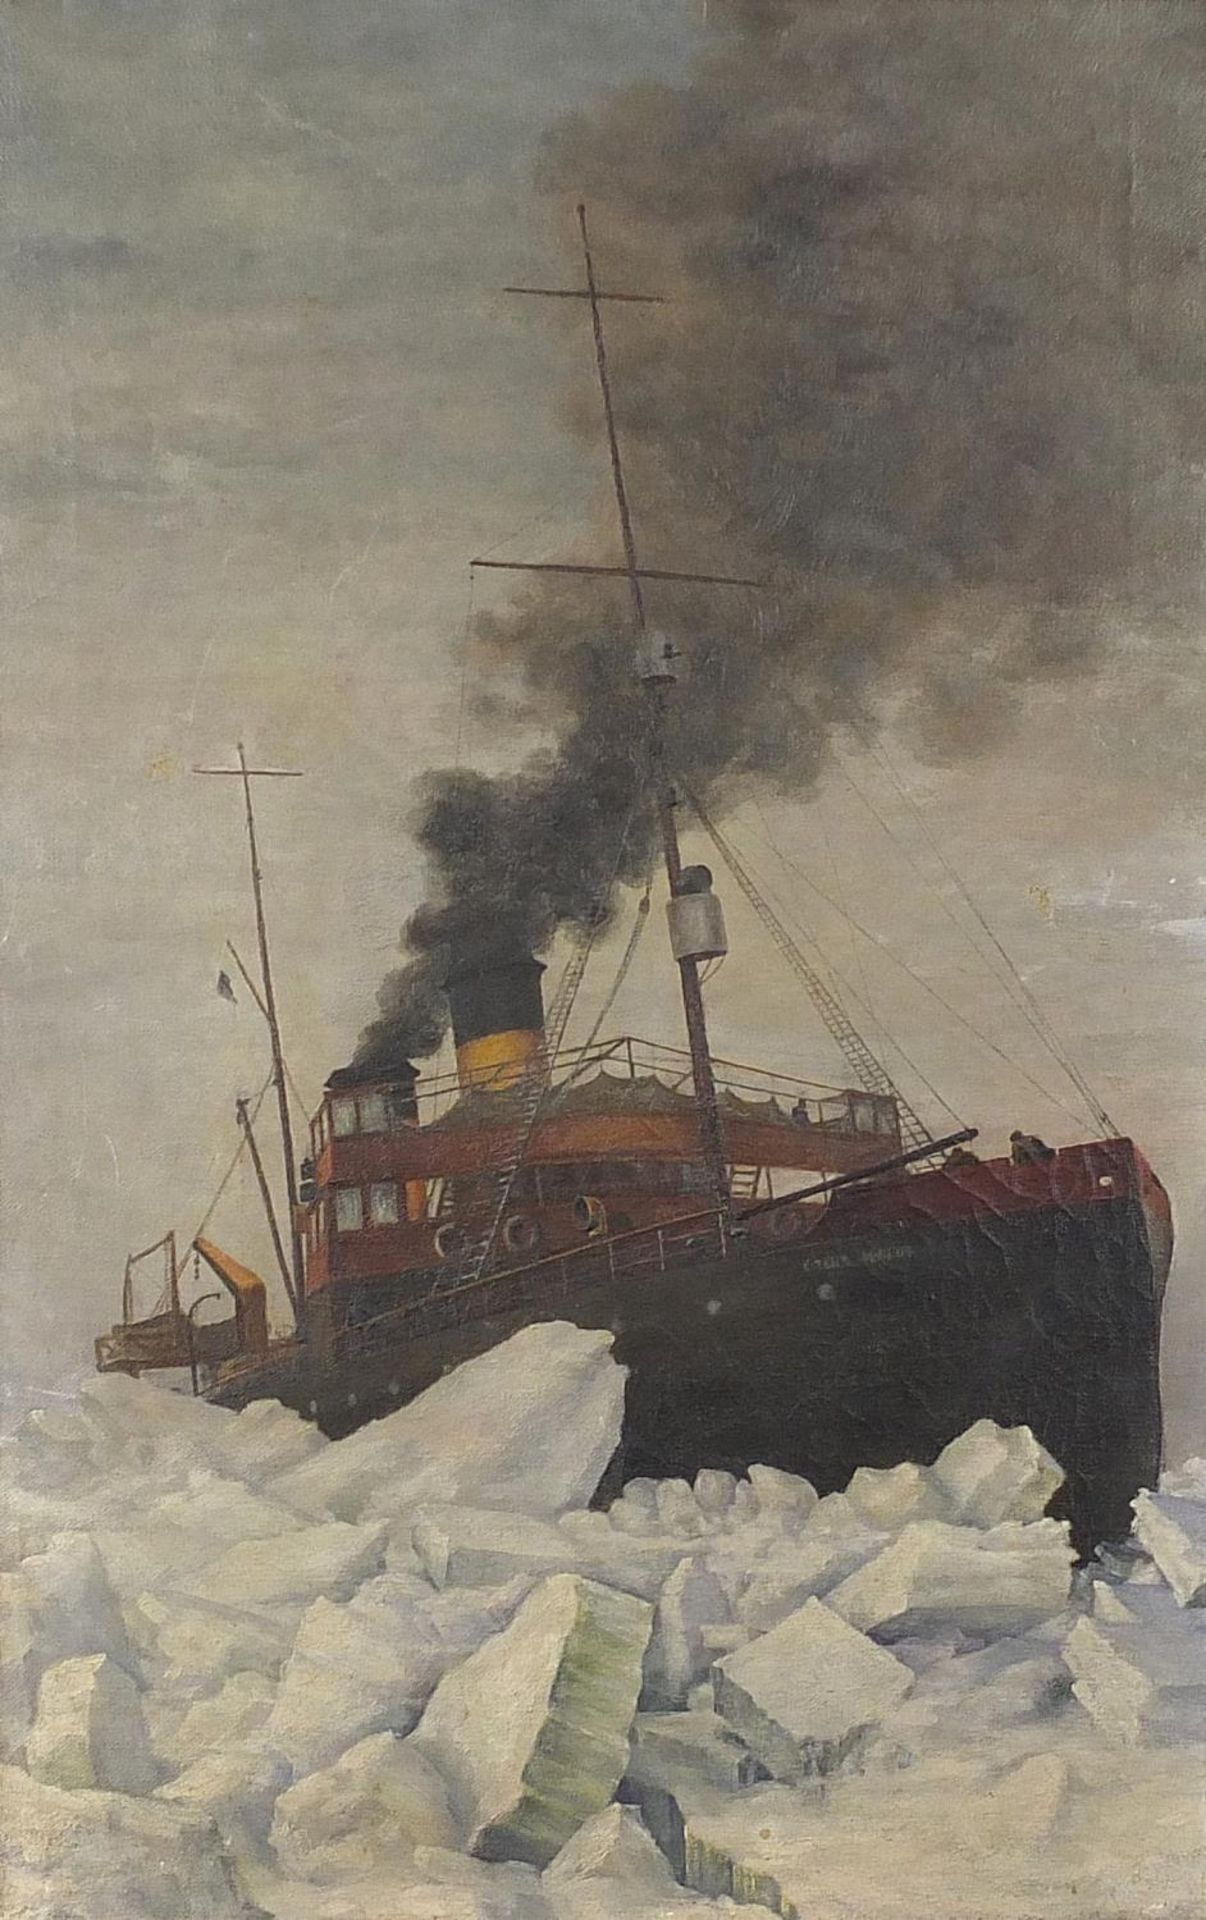 Russian ice breaker, 19th century century oil on canvas, Reeves & Sons stamp verso, mounted and